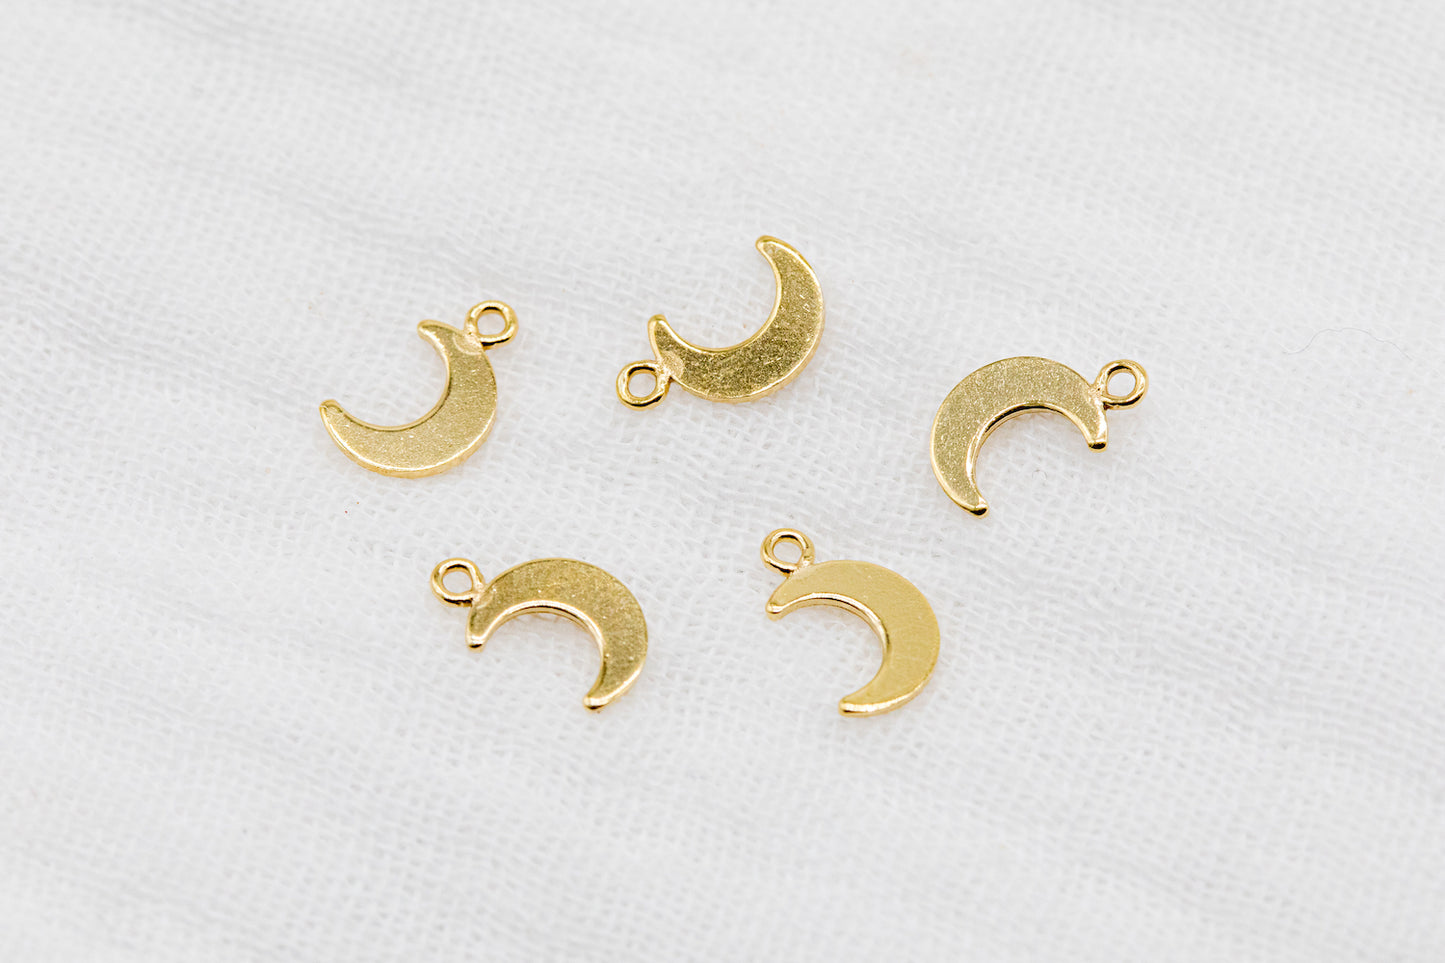 Moon Charm (5 pieces)